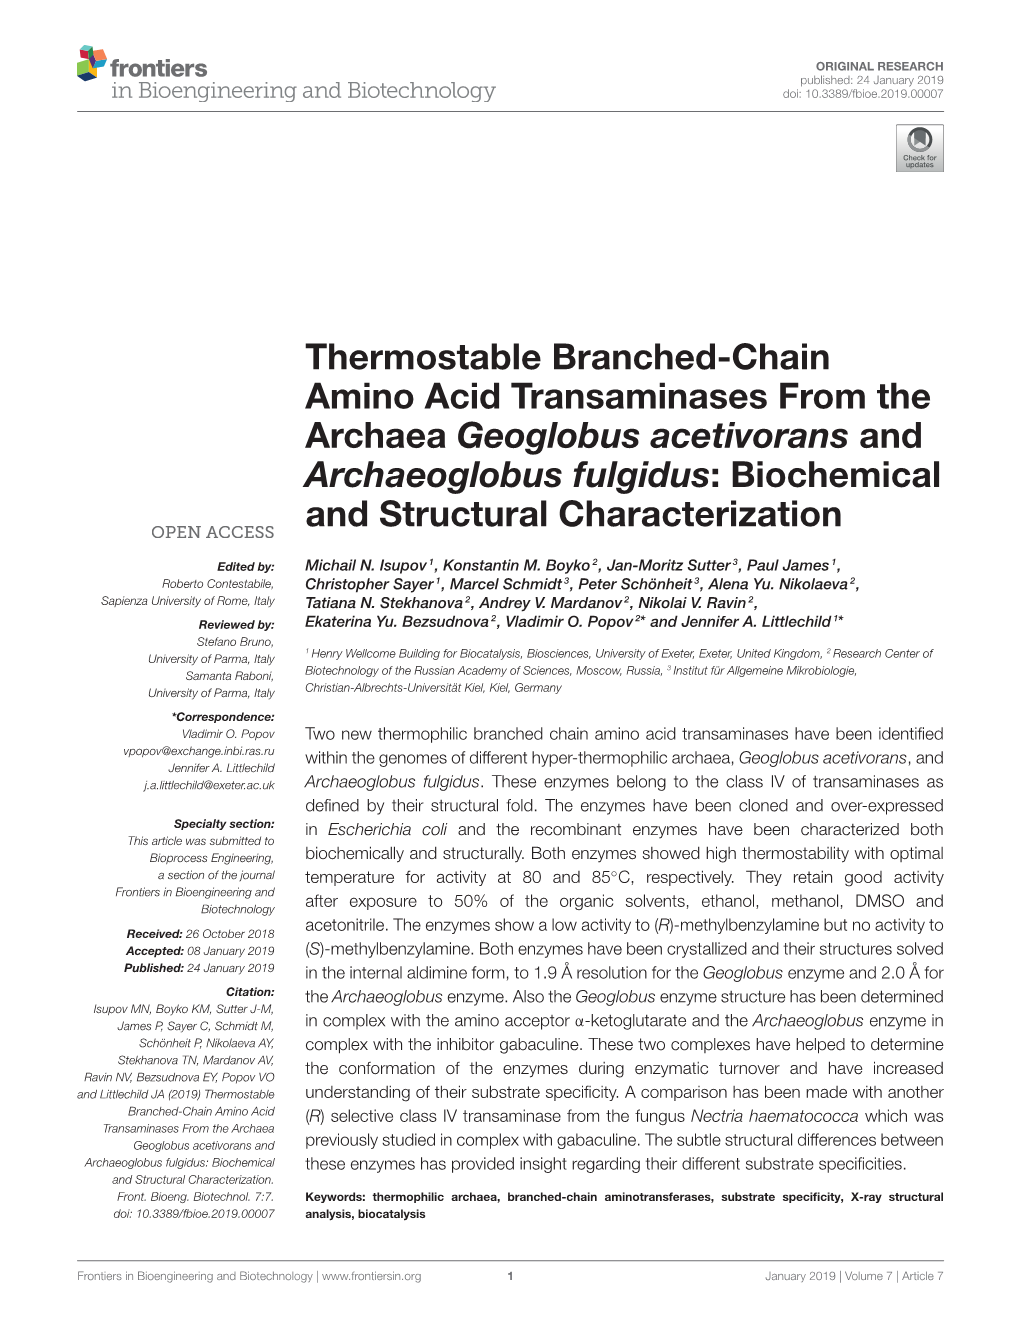 Thermostable Branched-Chain Amino Acid Transaminases from the Archaea Geoglobus Acetivorans and Archaeoglobus Fulgidus: Biochemical and Structural Characterization